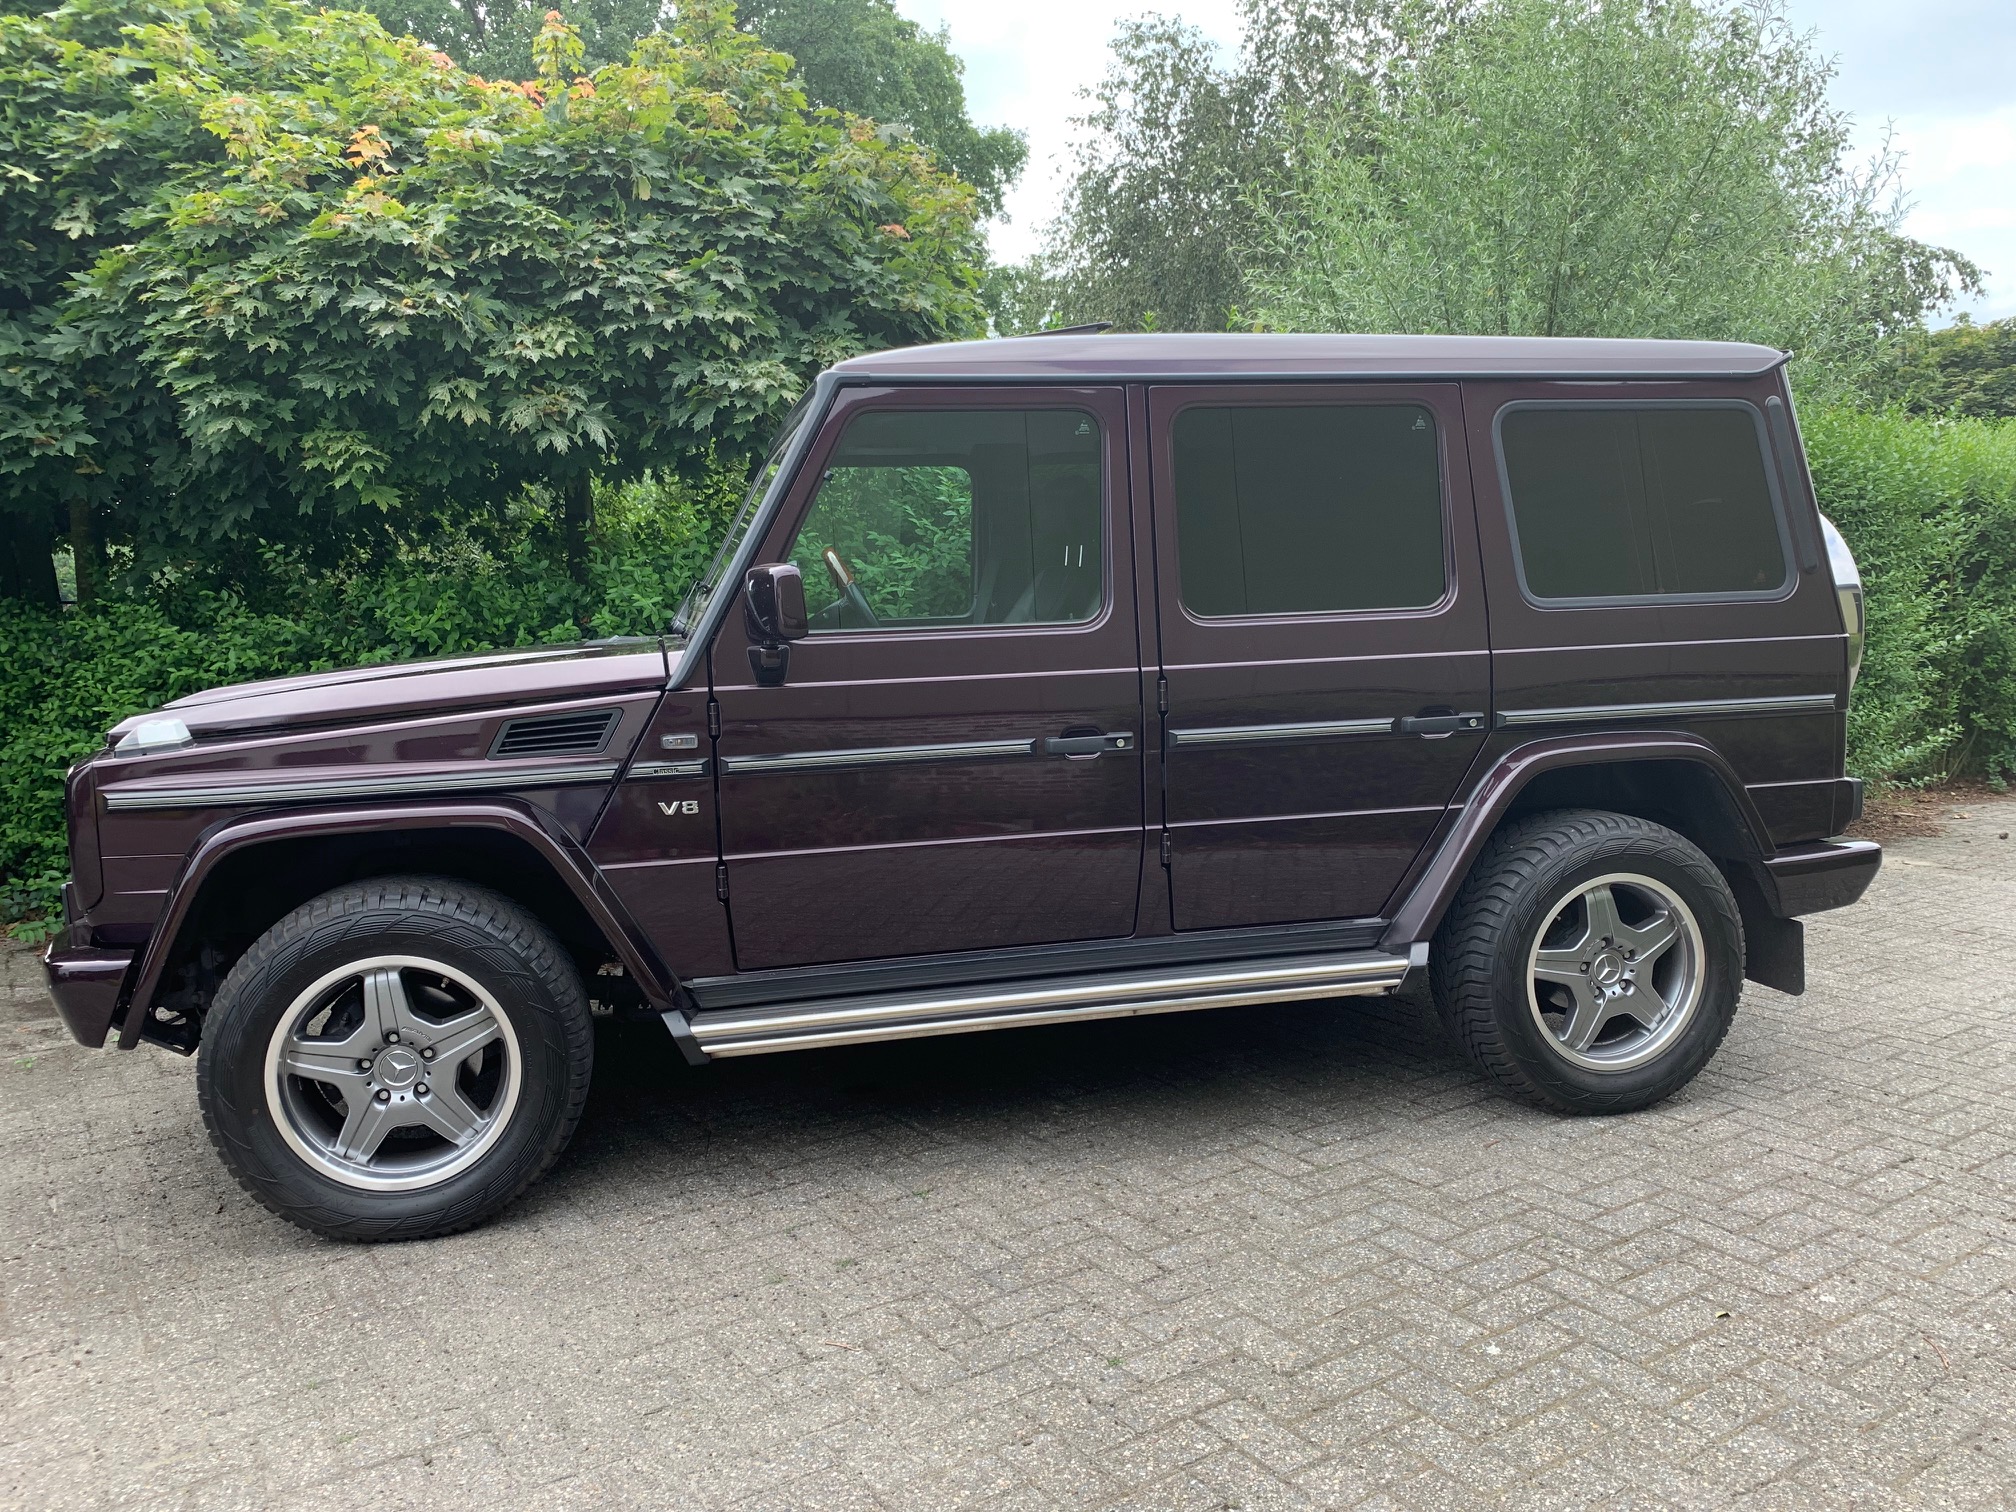 Mercedes-Benz G-Klasse G500 classic , one of only 500 built